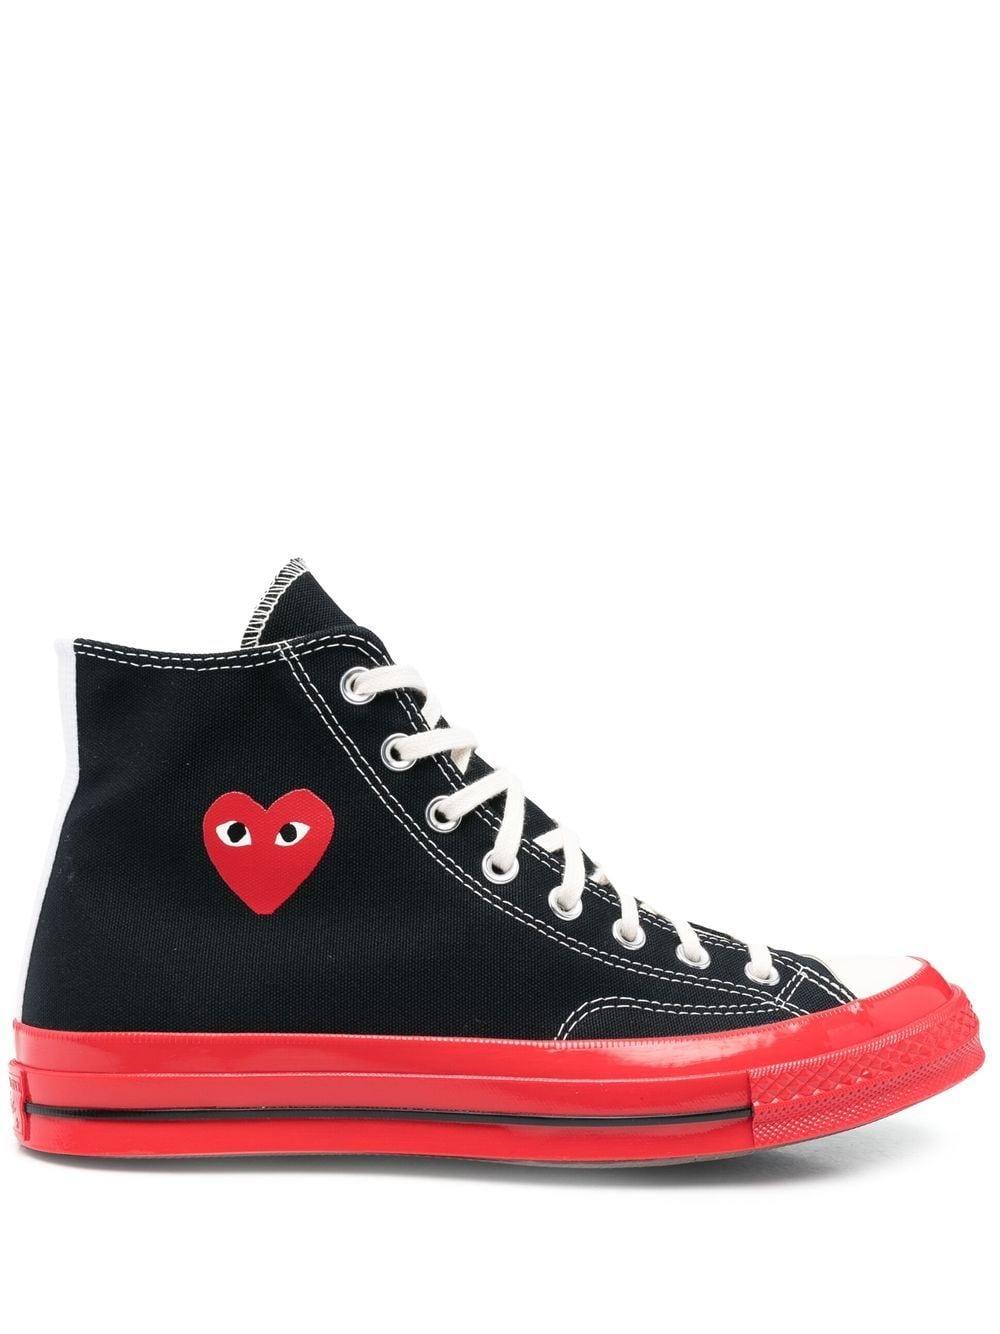 COMME DES GARÇONS PLAY Chuck 70 High-top Sneakers in Red | Lyst